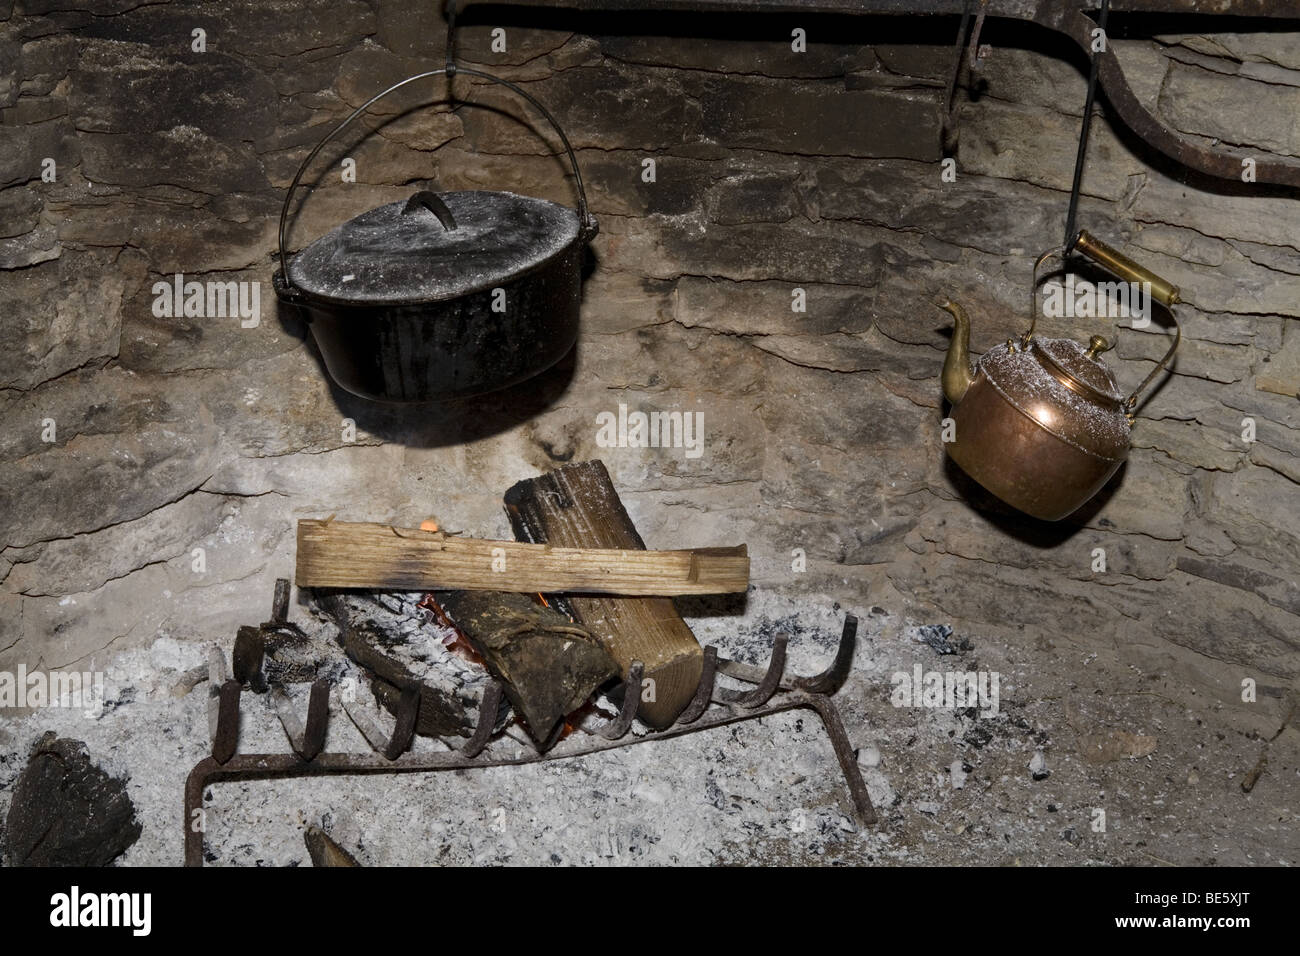 https://c8.alamy.com/comp/BE5XJT/fireplace-with-cast-iron-pot-and-kettle-BE5XJT.jpg